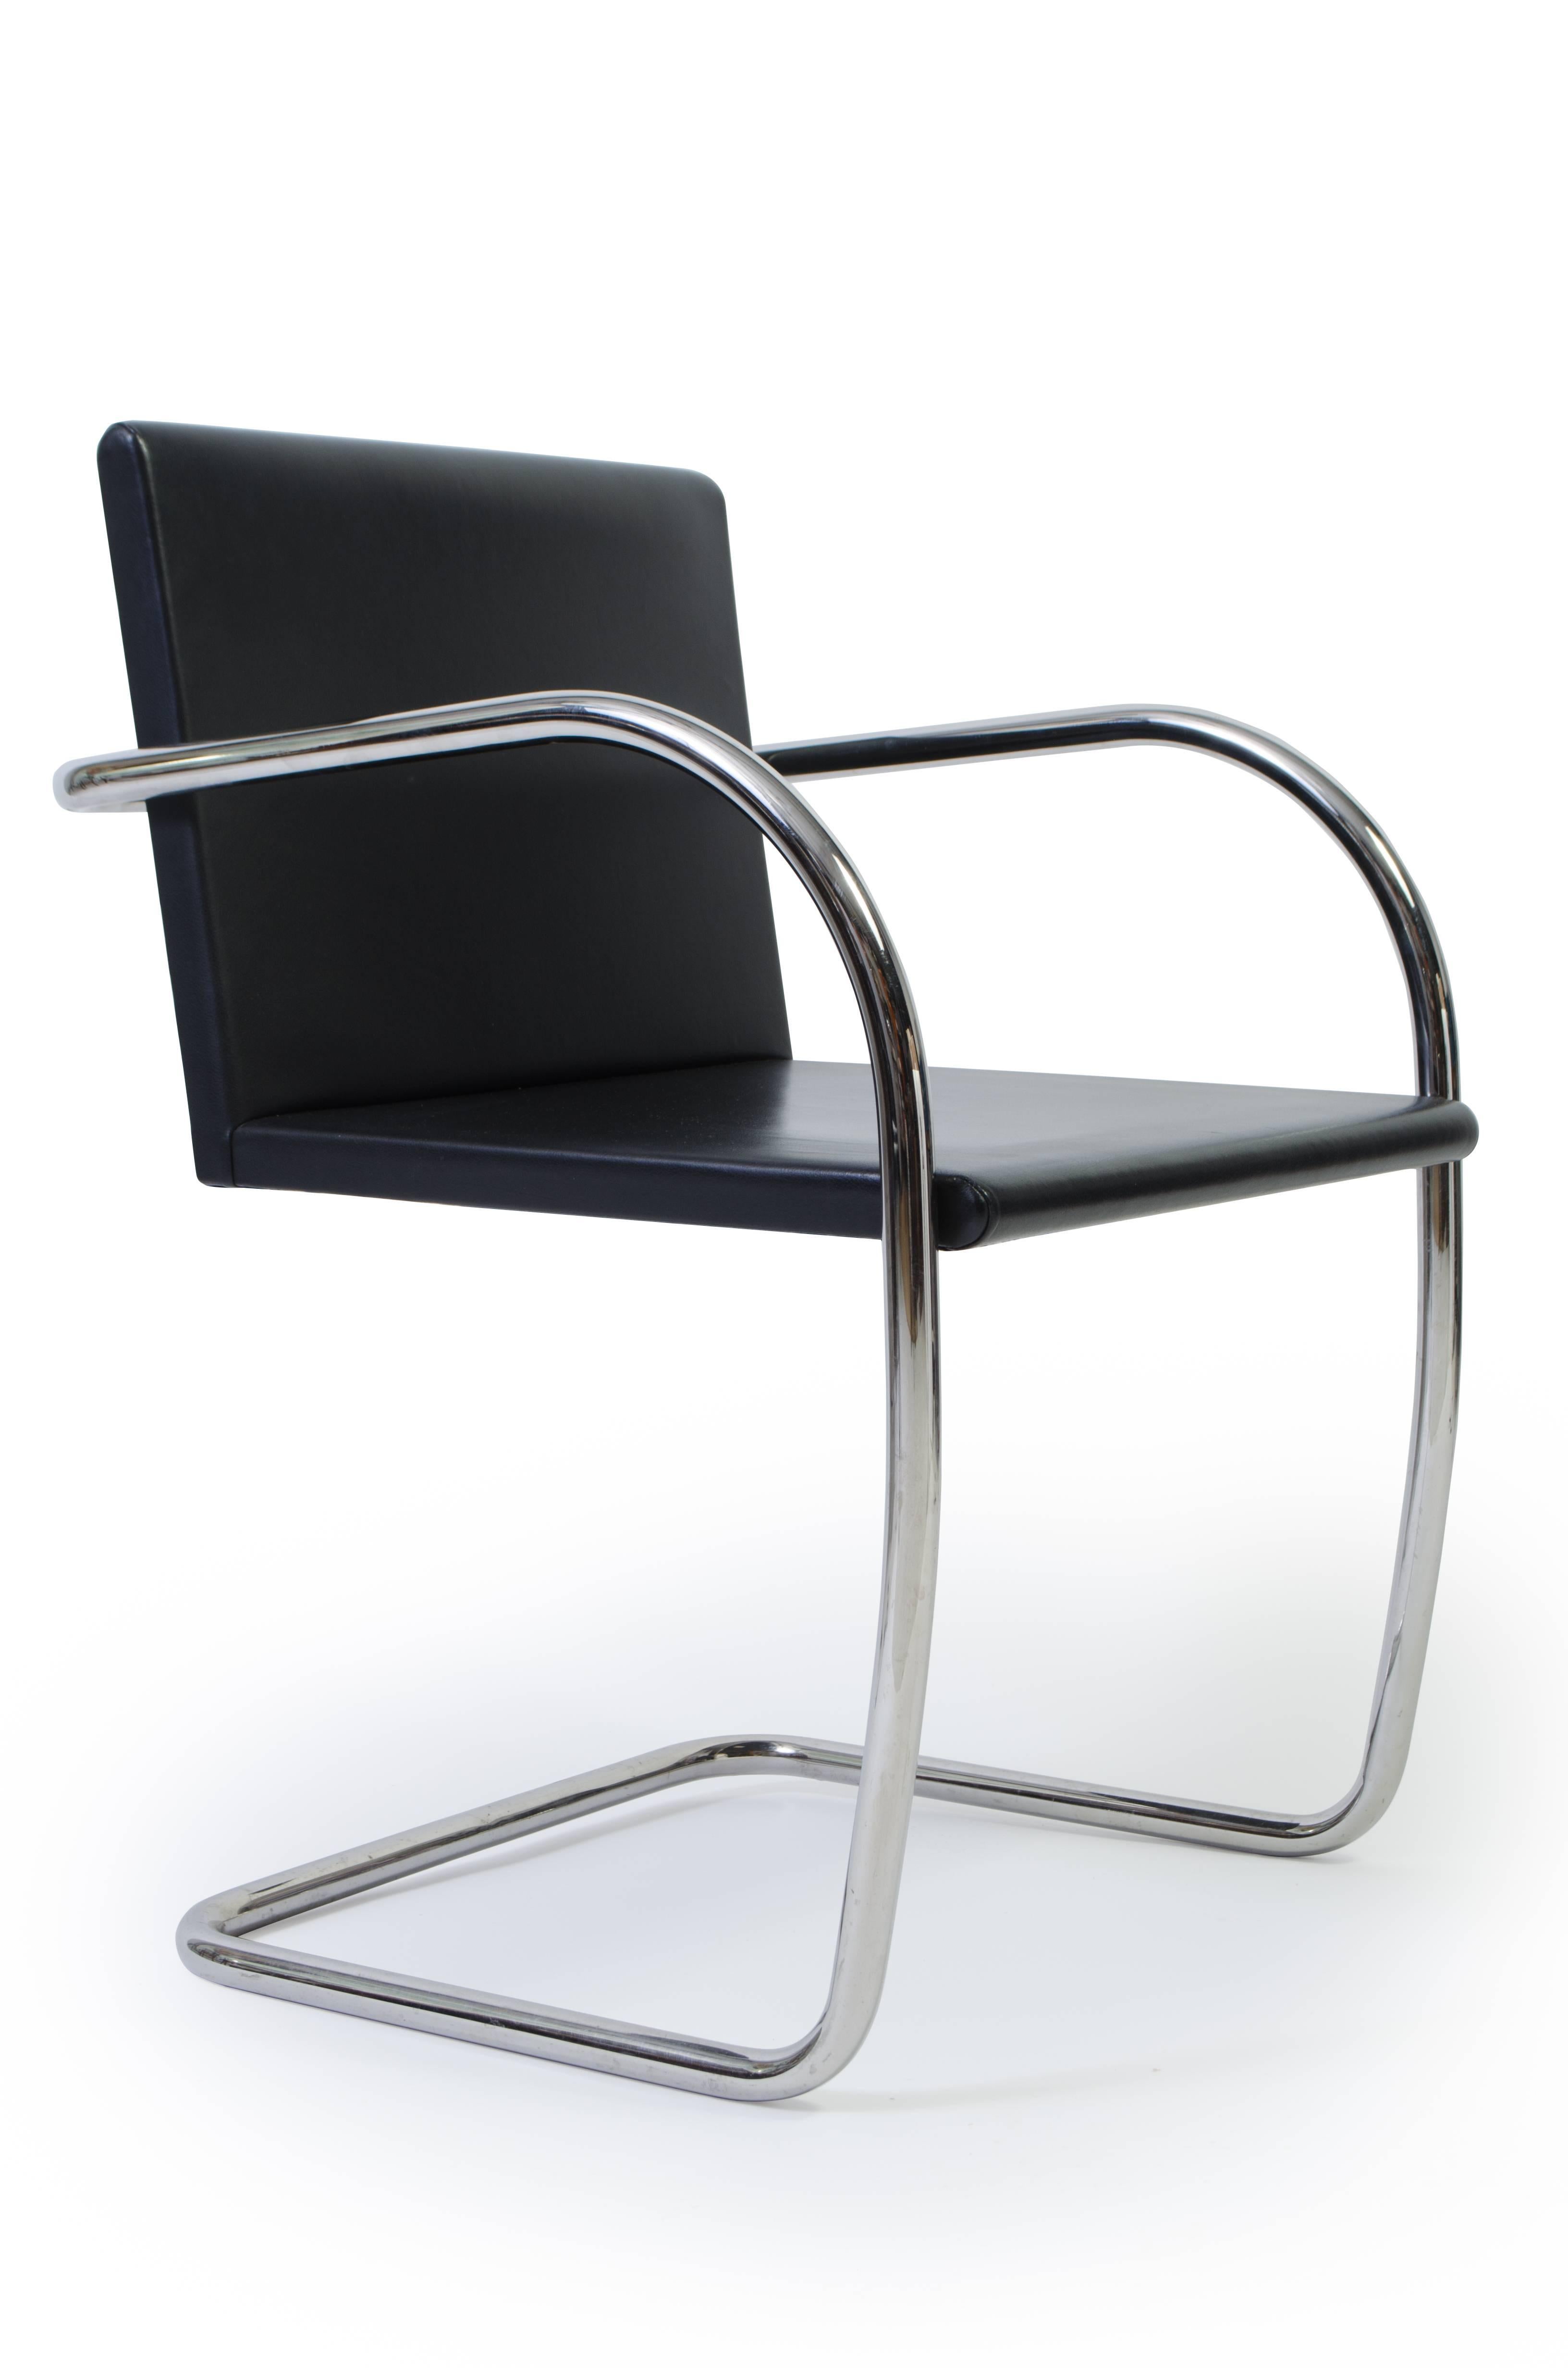 Mid-Century Modern Brno Tubular Thin-Pad Chairs in Black Leather, Set of Four